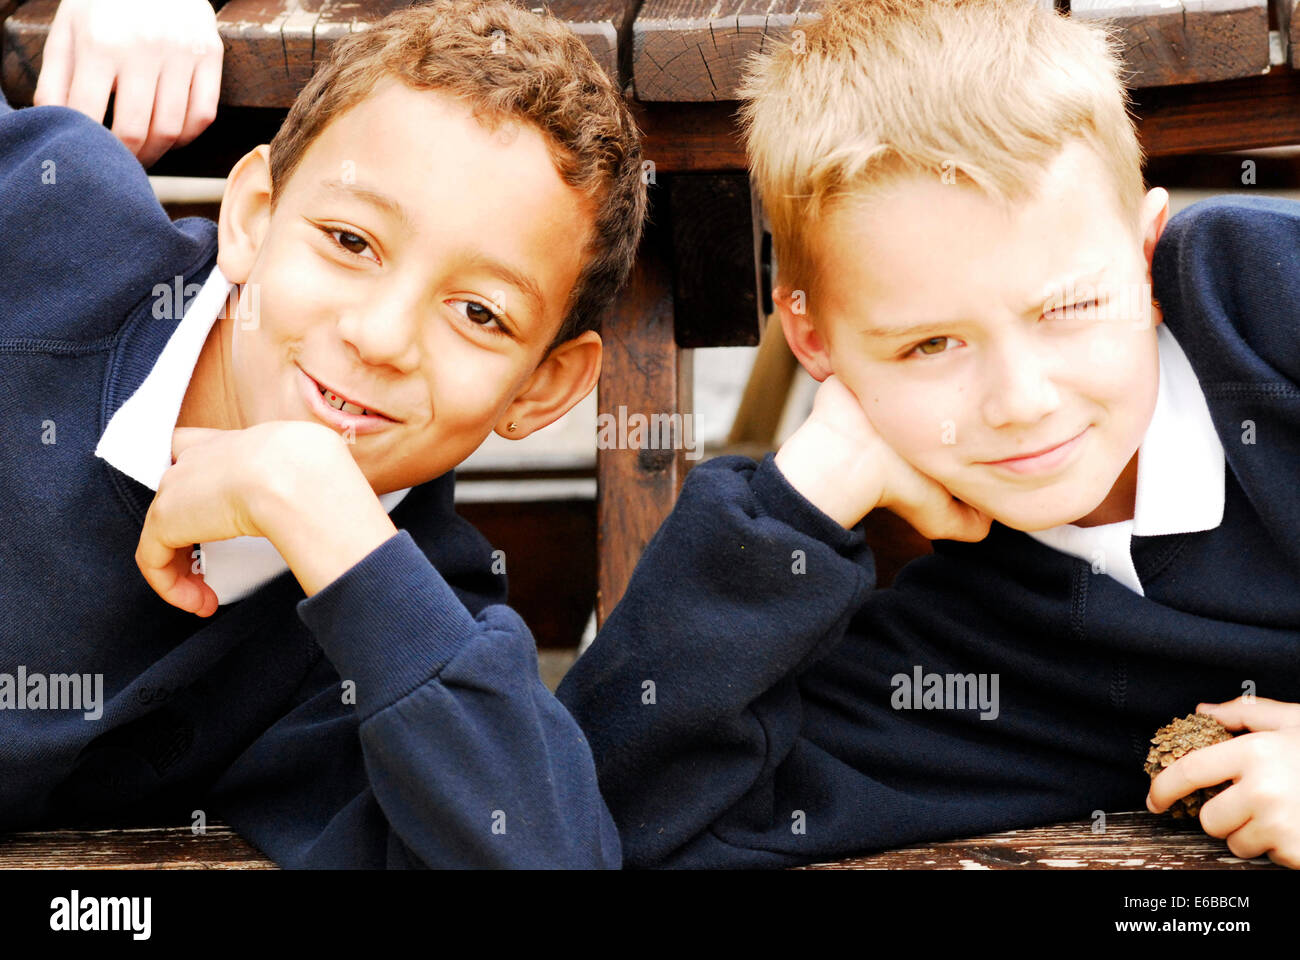 United Kingdom, England, London, Eltam, portrait of young boy of mixed race with blond boy (MR). Stock Photo